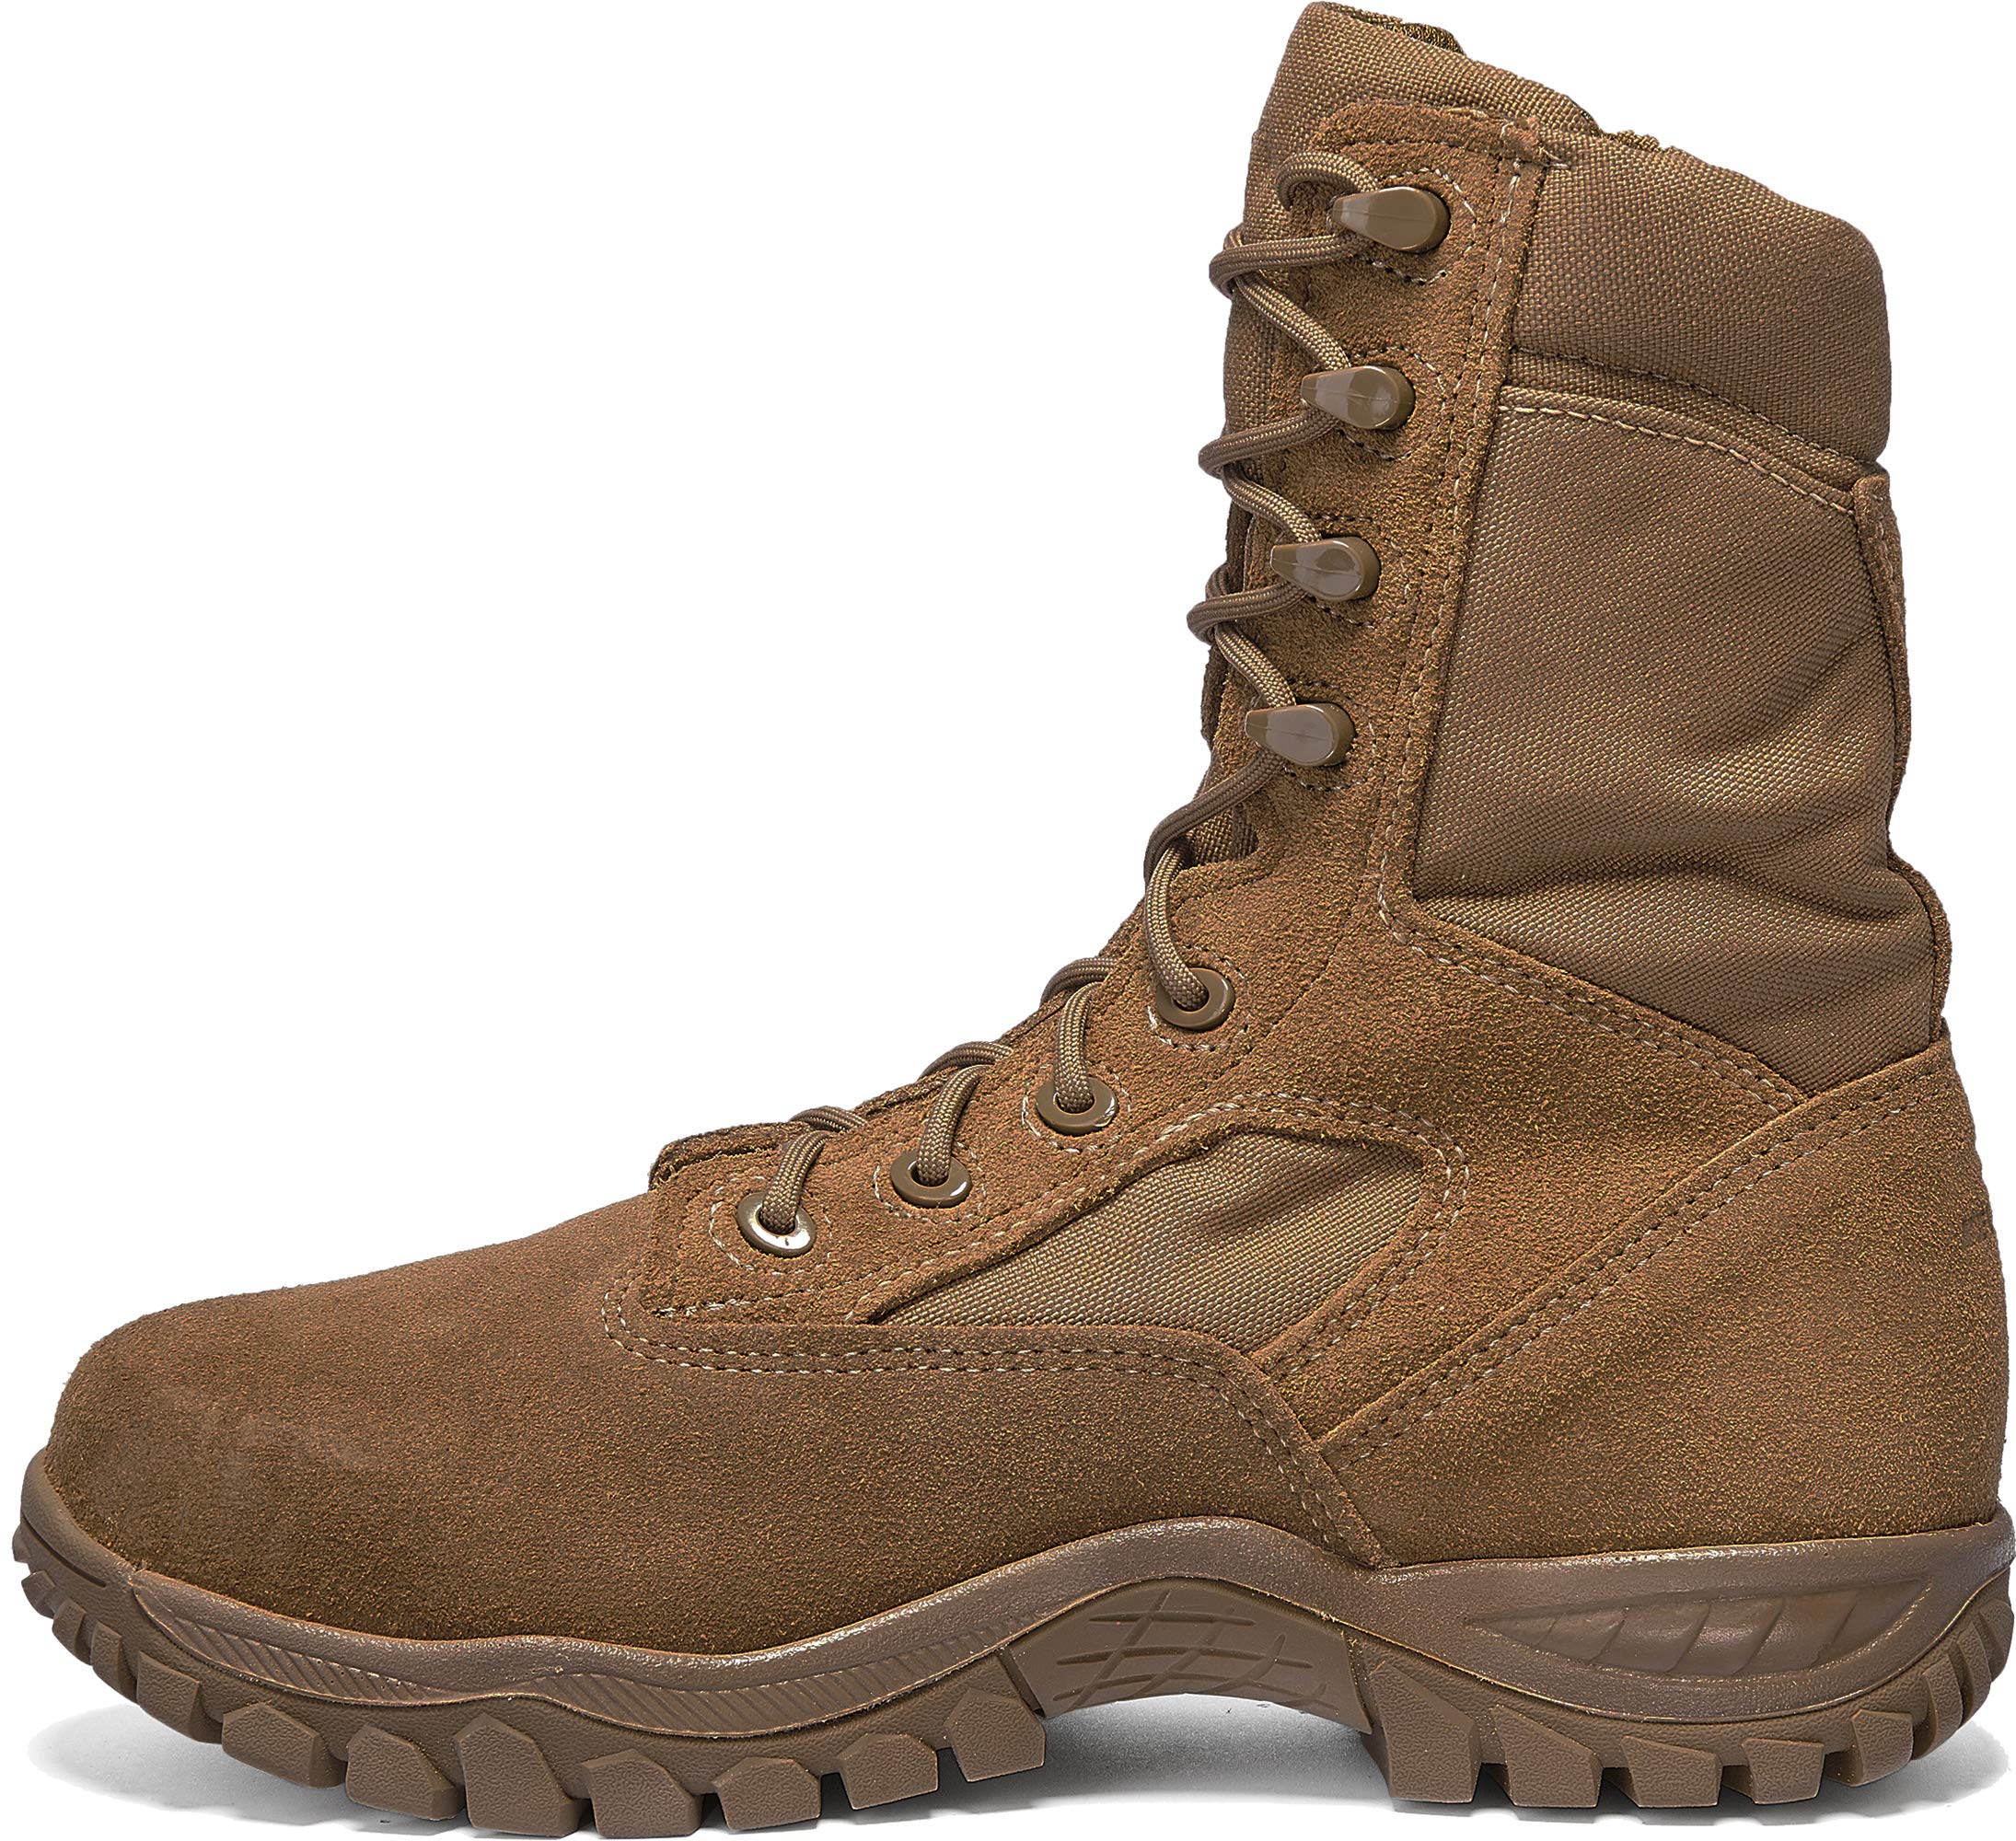 Belleville C312 ST 8” Hot Weather Steel Toe Tactical Boots for Men - AR 670-1/AFI 36-2903 Coyote Brown Leather with Slip-Resistant Vibram Incisor Outsole; Berry Compliant